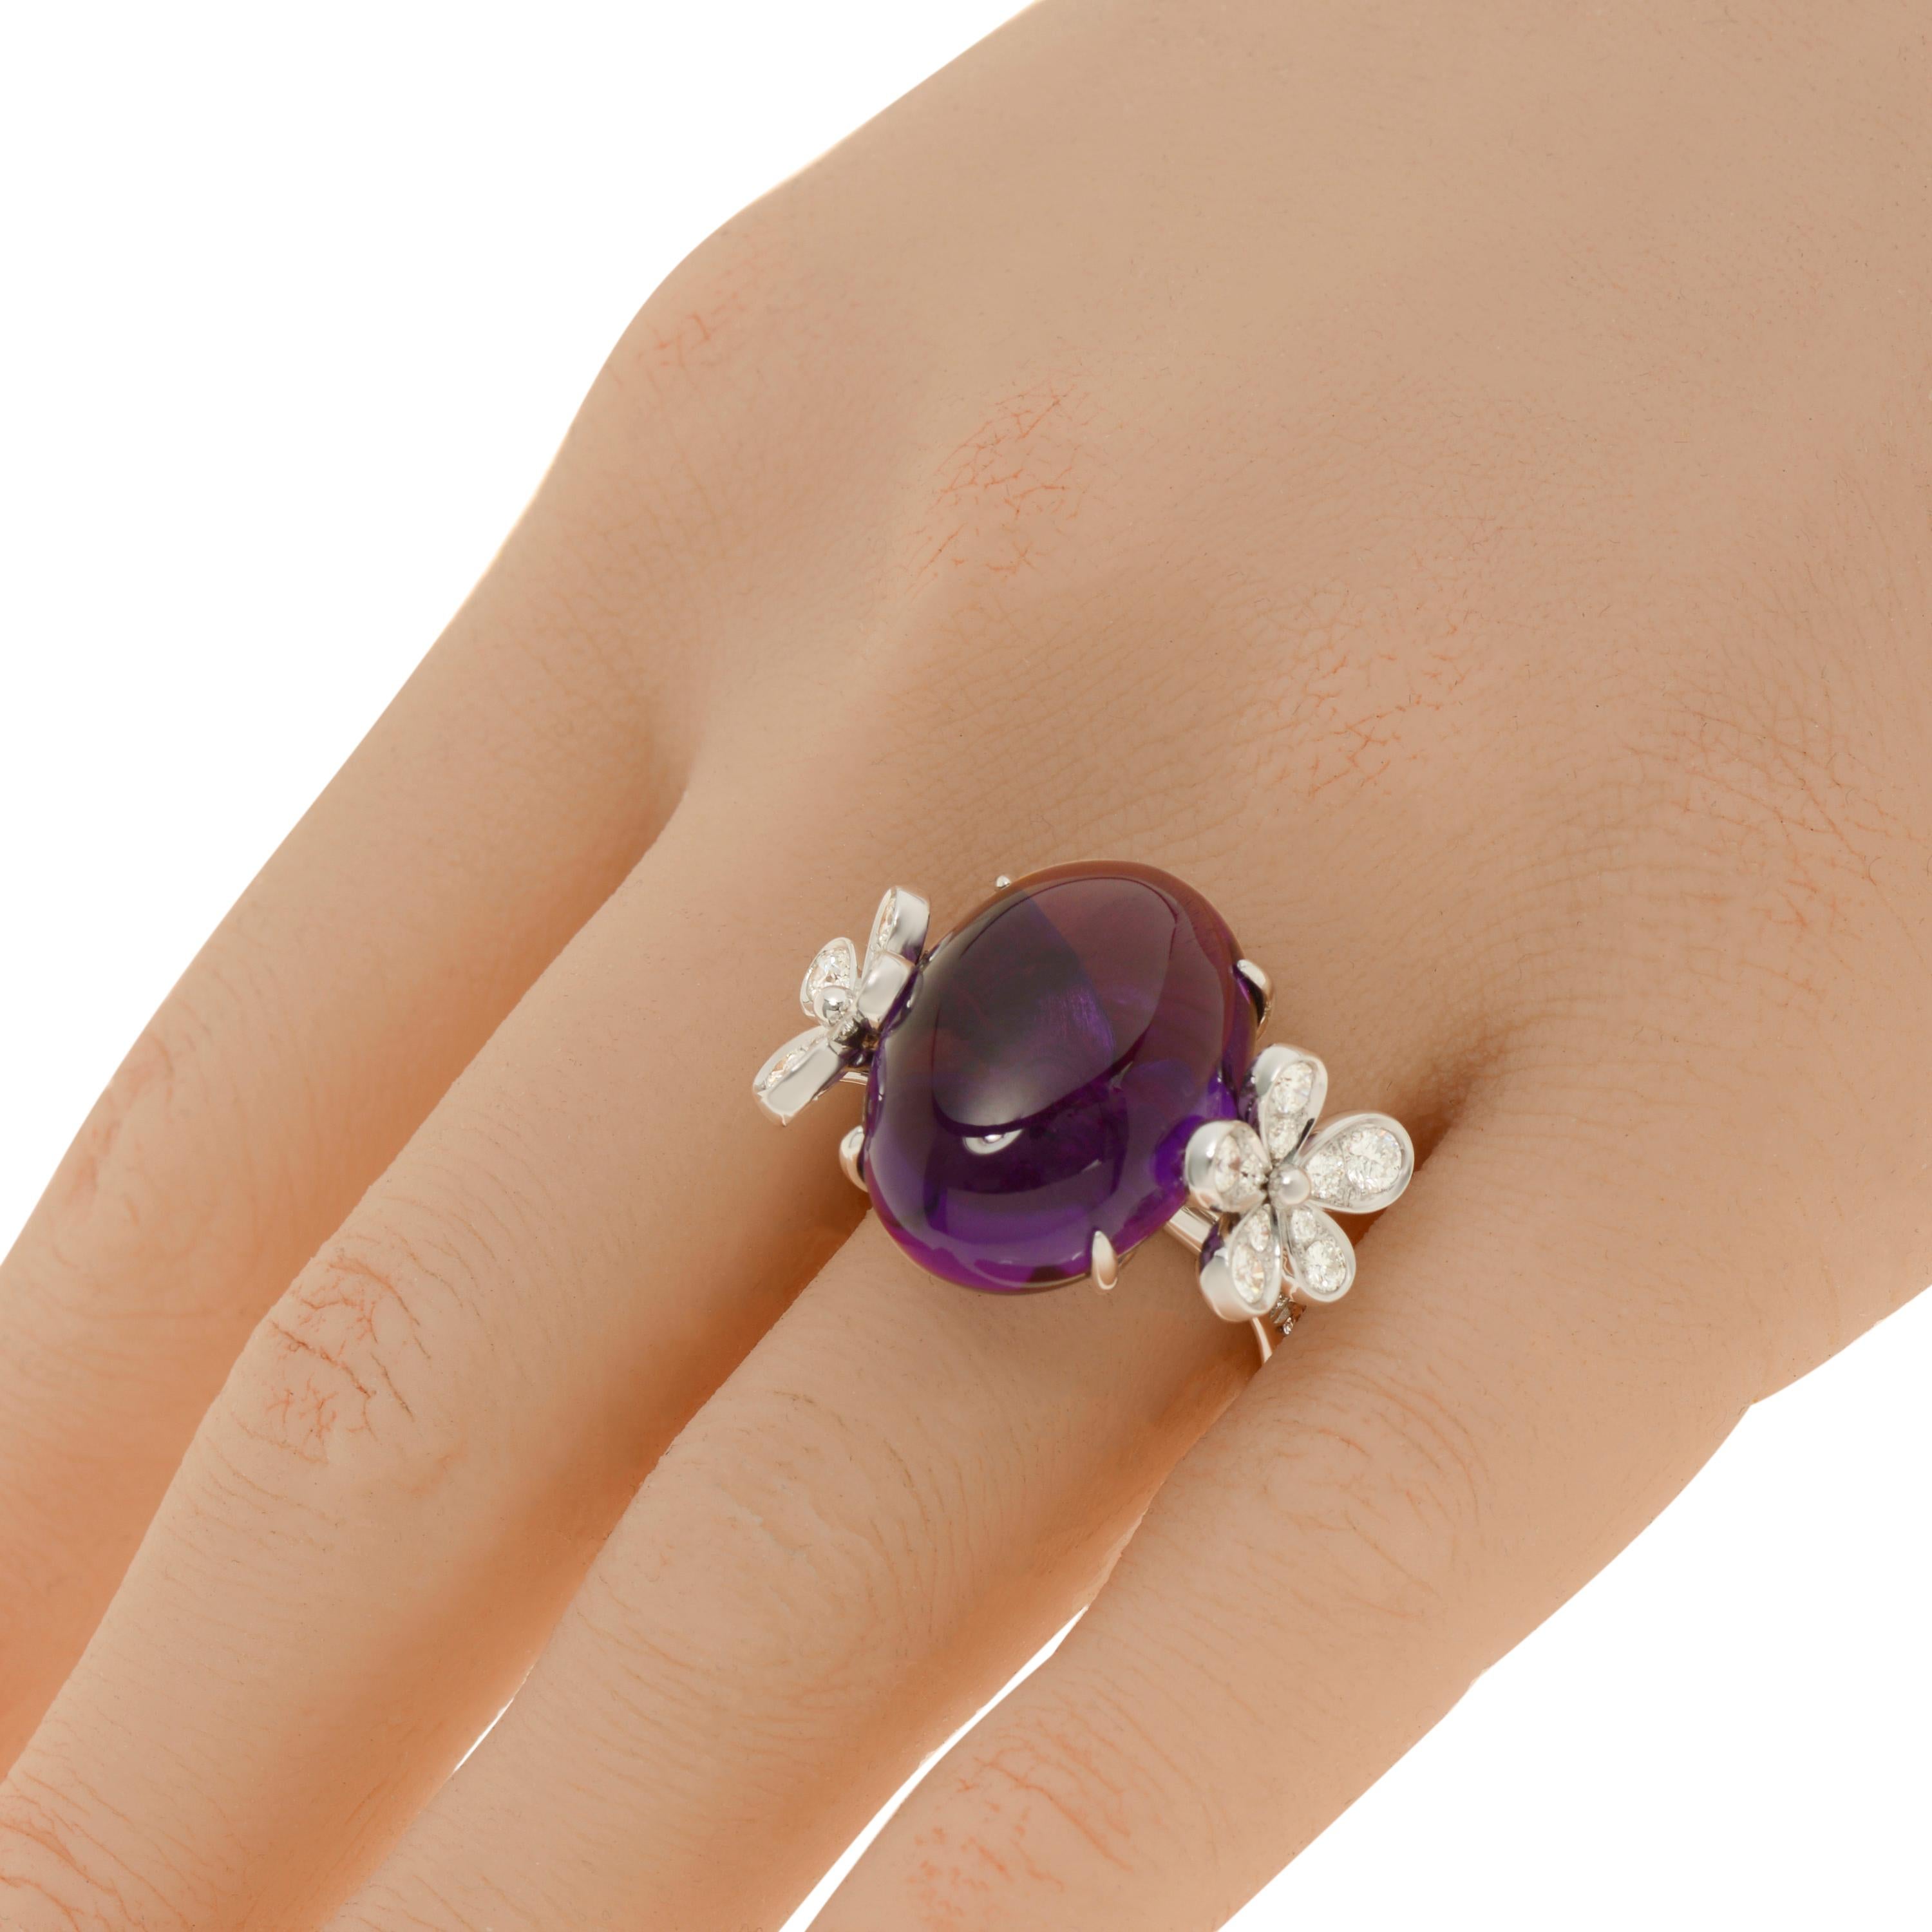 Mimi Milano 18K white gold statement ring features amethyst center with 1.14ct. tw. diamonds set in delicate floral design. The ring size is 6.5 (53.1). The decoration size is 1 1/8